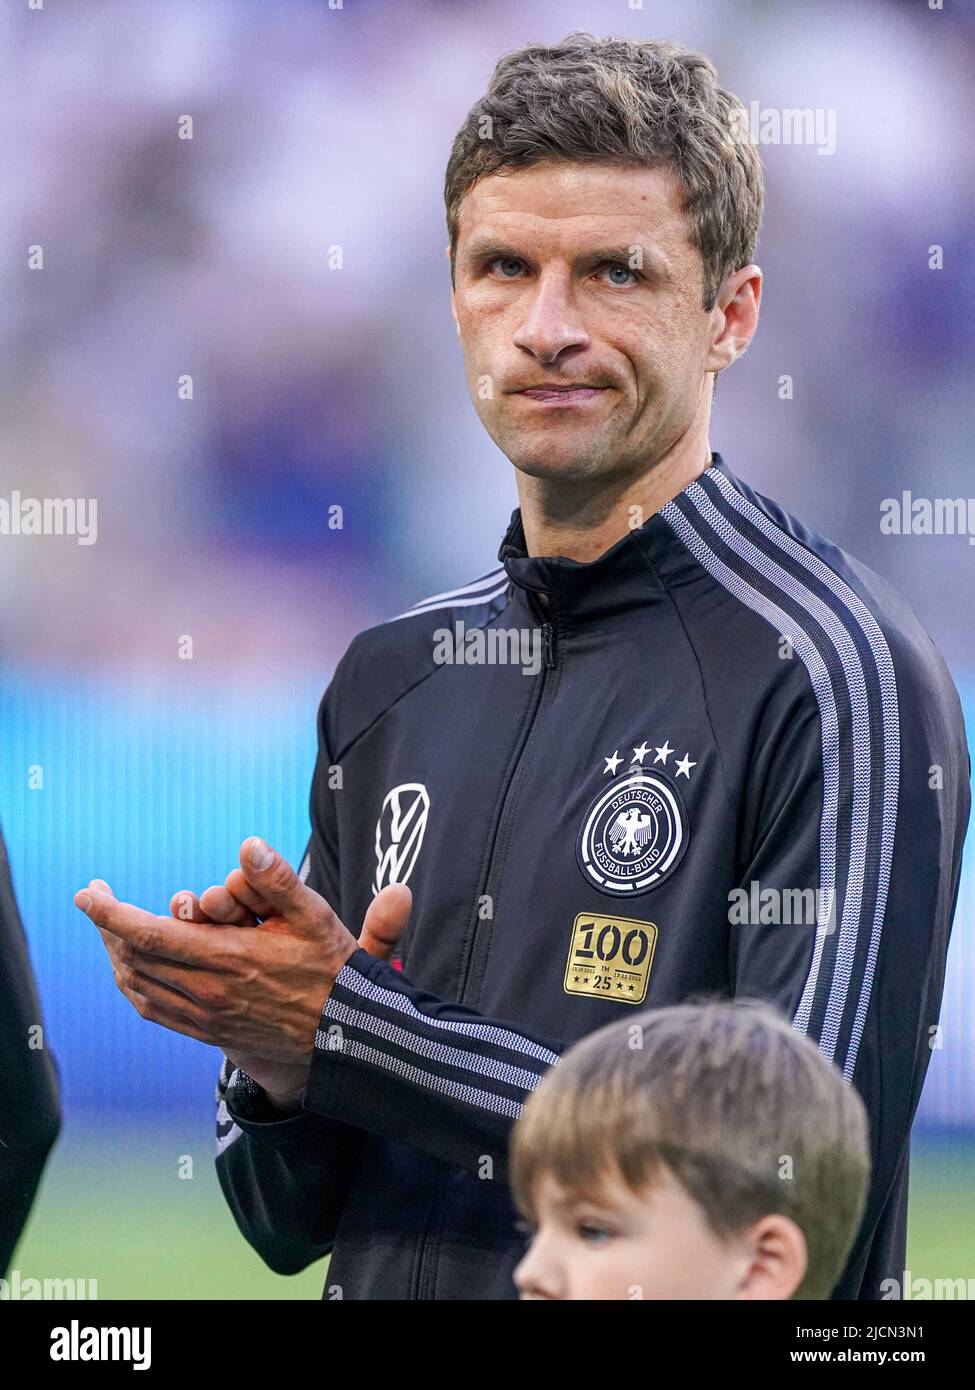 MöNCHENGLADBACH, GERMANY - JUNE 14: Thomas Muller of Germany prior to the UEFA Nations League match between Germany and Italy at Borussia-Park on June 14, 2022 in Mönchengladbach, Germany (Photo by Joris Verwijst/Orange Pictures) Stock Photo